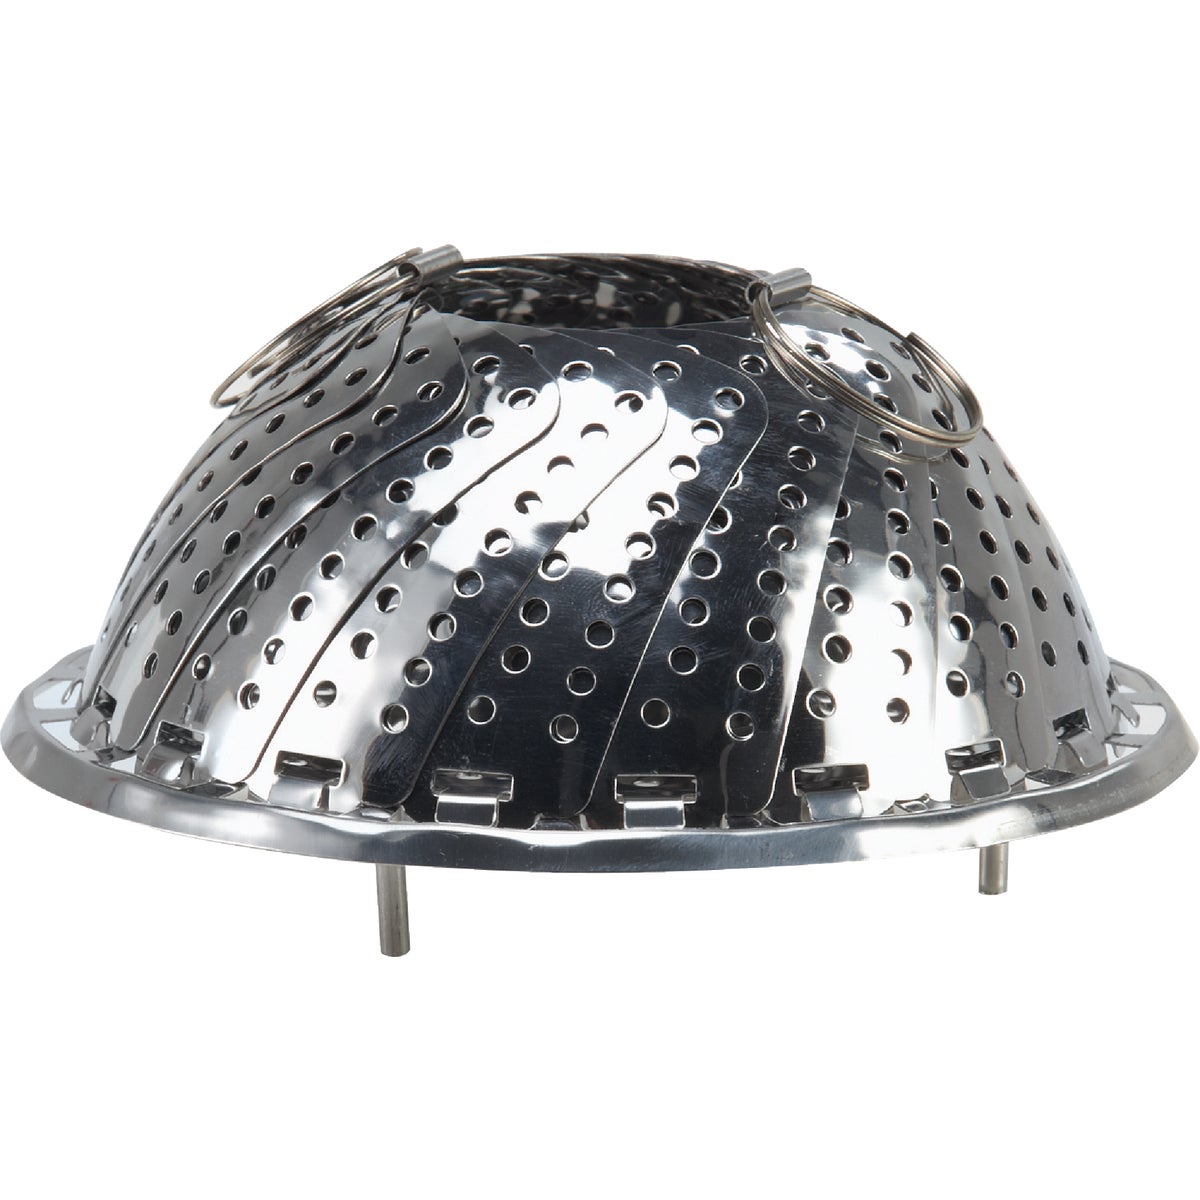 Item 640875, Stainless steel, no post design steamer basket expands from 5-1/2 In.